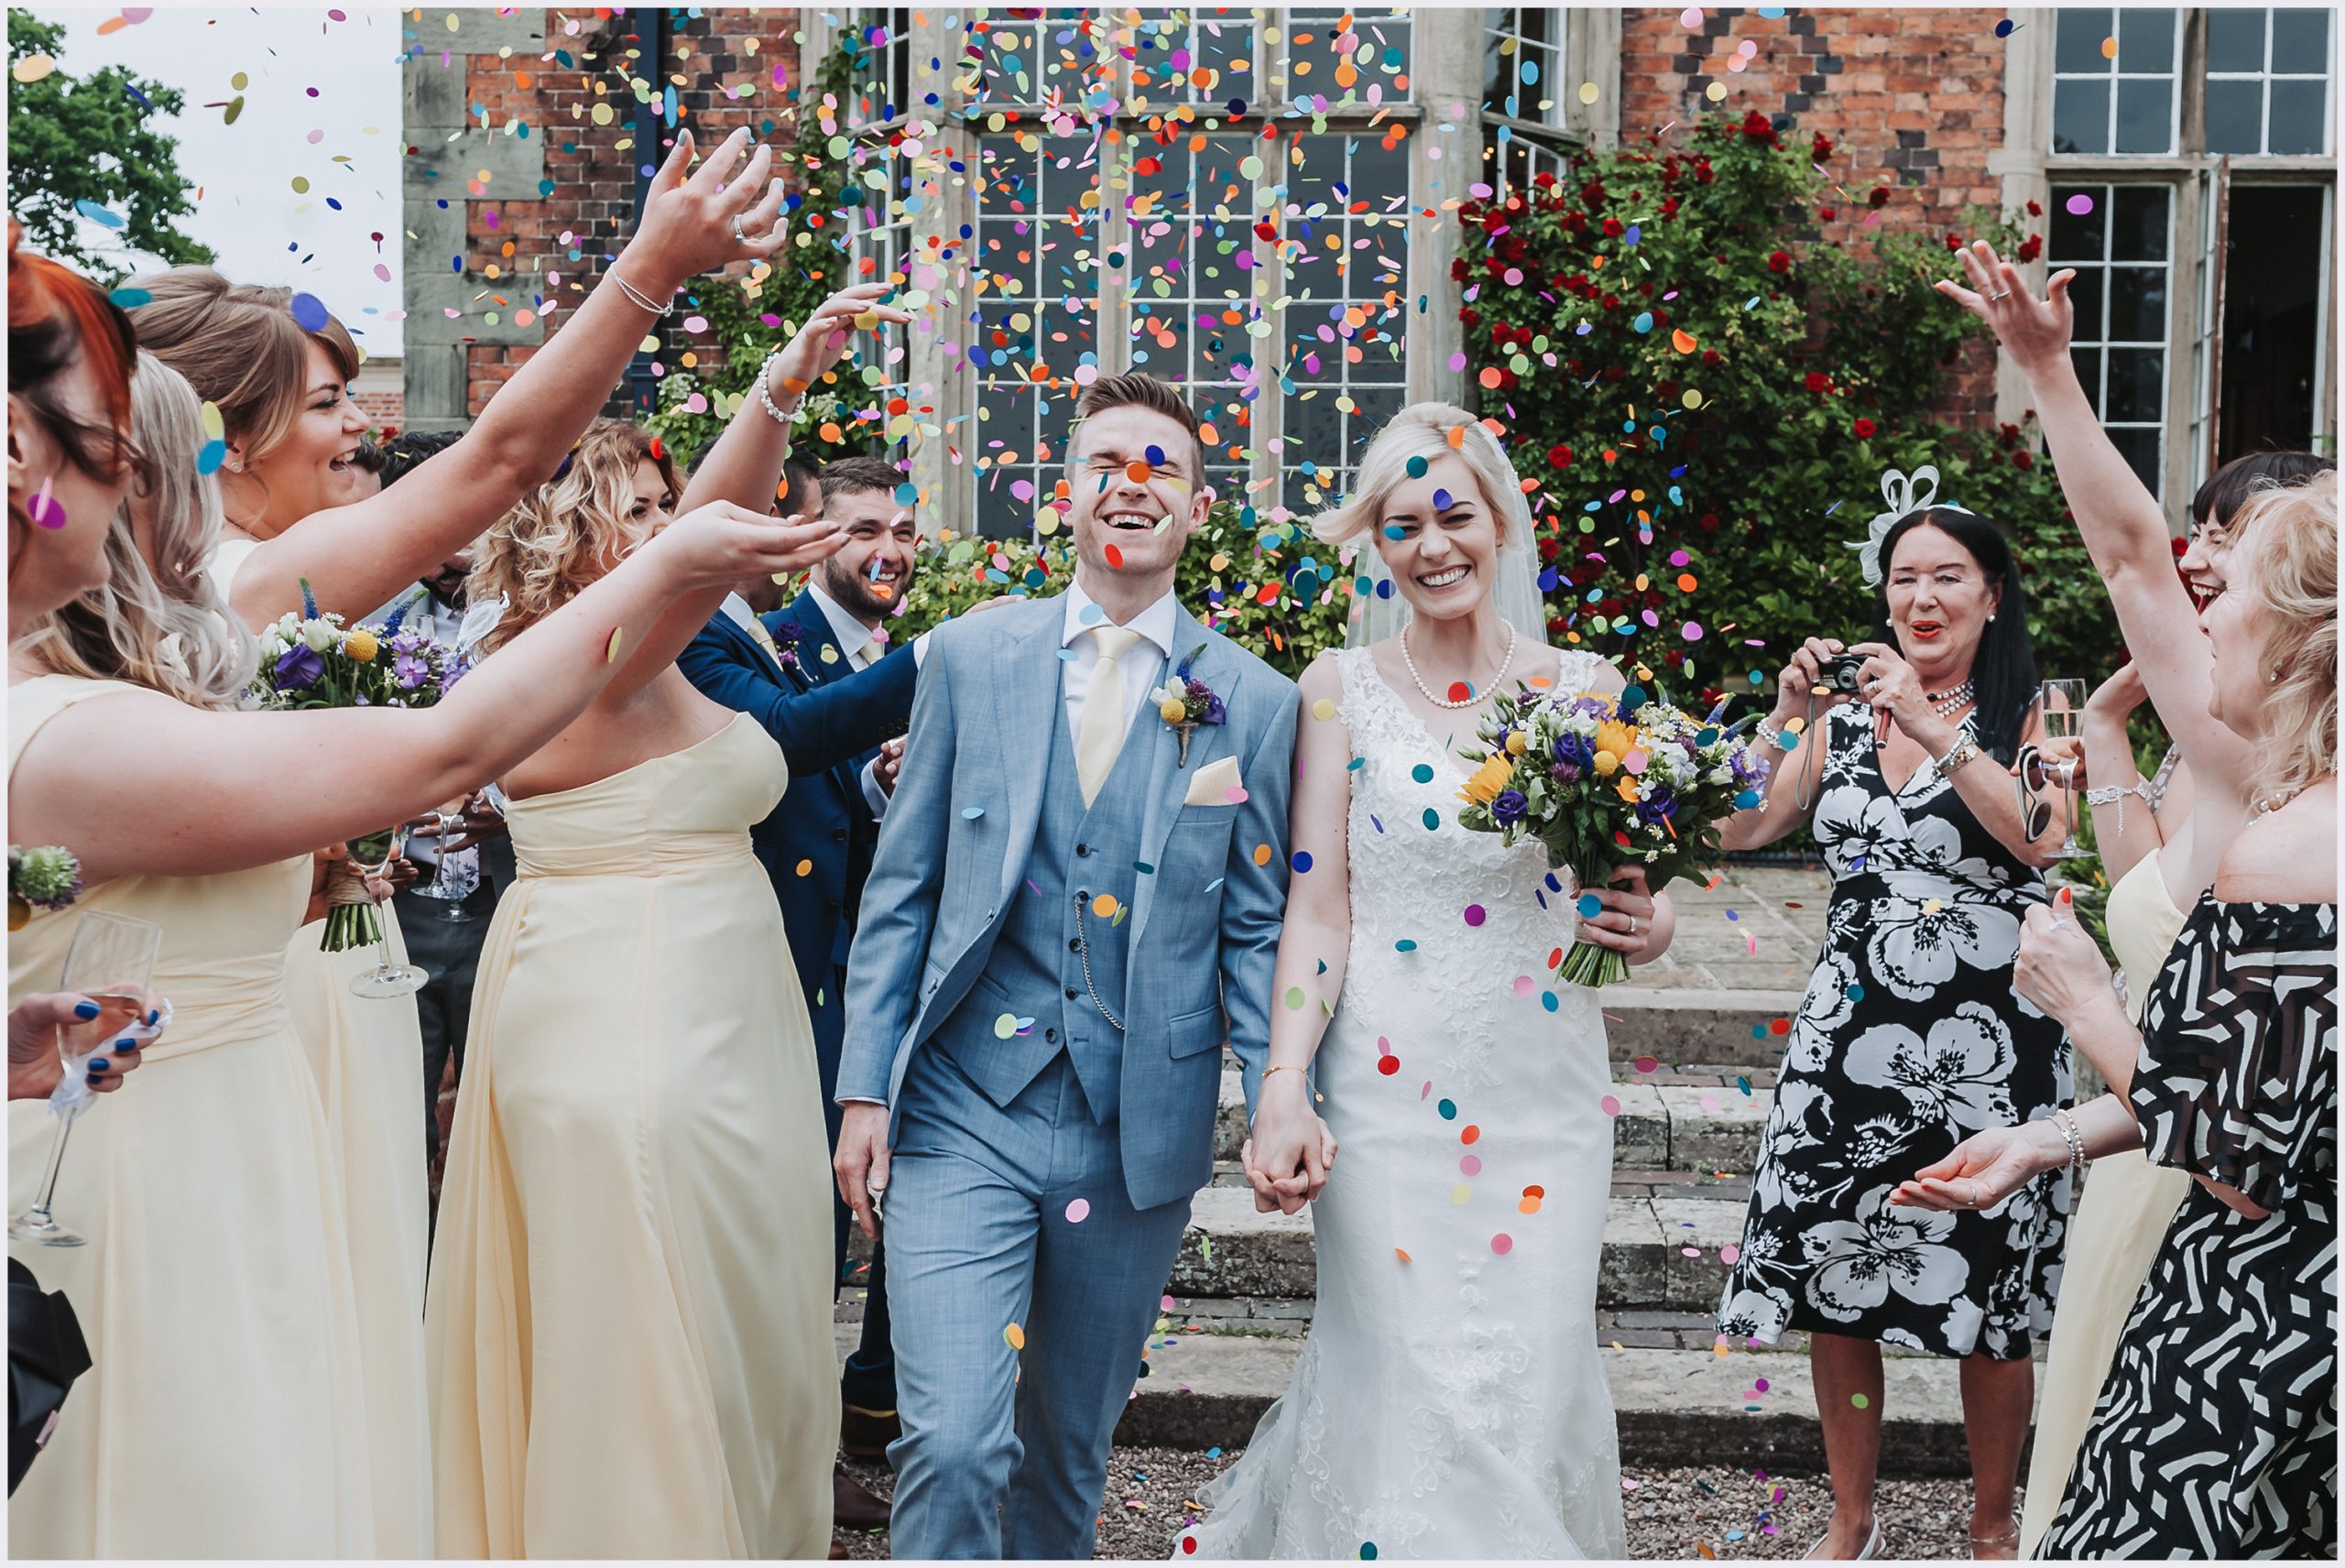 A gorgeous bride and groom smile outside Willington Hall Hotel in Cheshire after getting married.  Guests are throwing brightly colour confetti at them as they walk past.  Image captured by Cheshire Wedding Photographer Helena Jayne Photography.